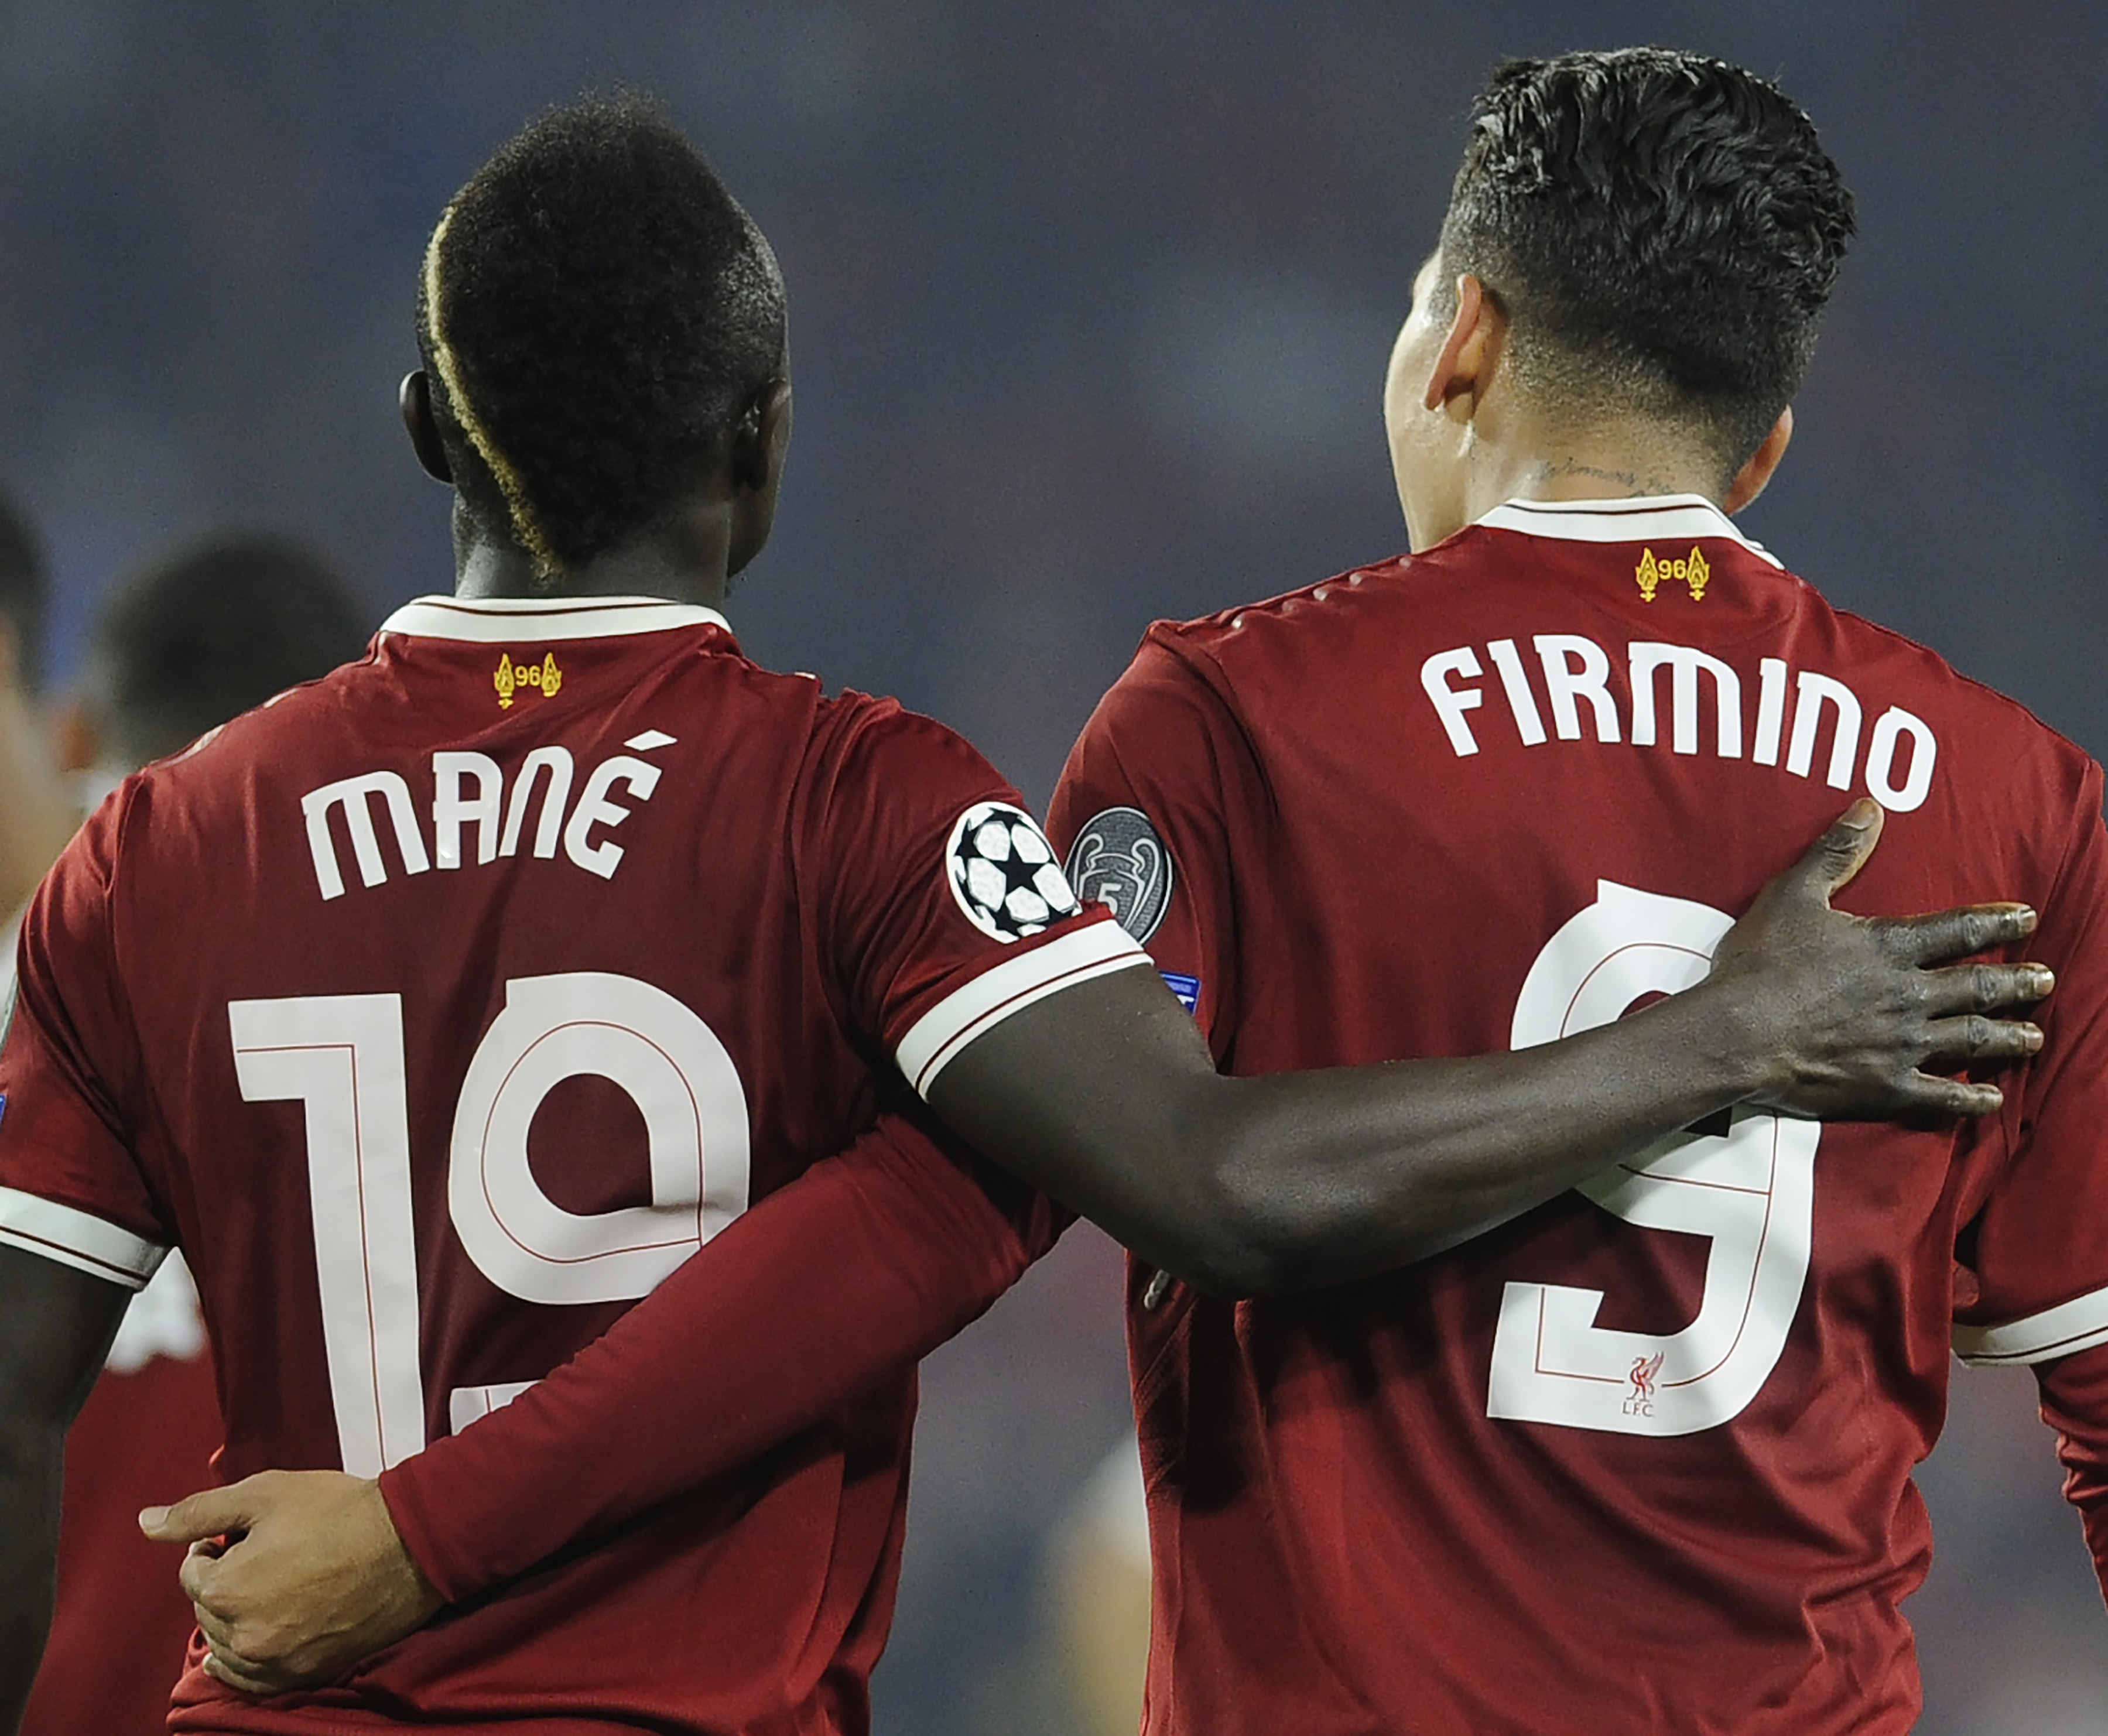 Liverpool's Brazilian midfielder Roberto Firmino (R) celebrates with Liverpool's Senegalese midfielder Sadio Mane (L) after scoring a goal on November 21, 2017 at the Ramon Sanchez Pizjuan stadium in Sevilla during the UEFA Champions League group E football match between Sevilla FC and Liverpool FC. / AFP PHOTO / CRISTINA QUICLER        (Photo credit should read CRISTINA QUICLER/AFP/Getty Images)